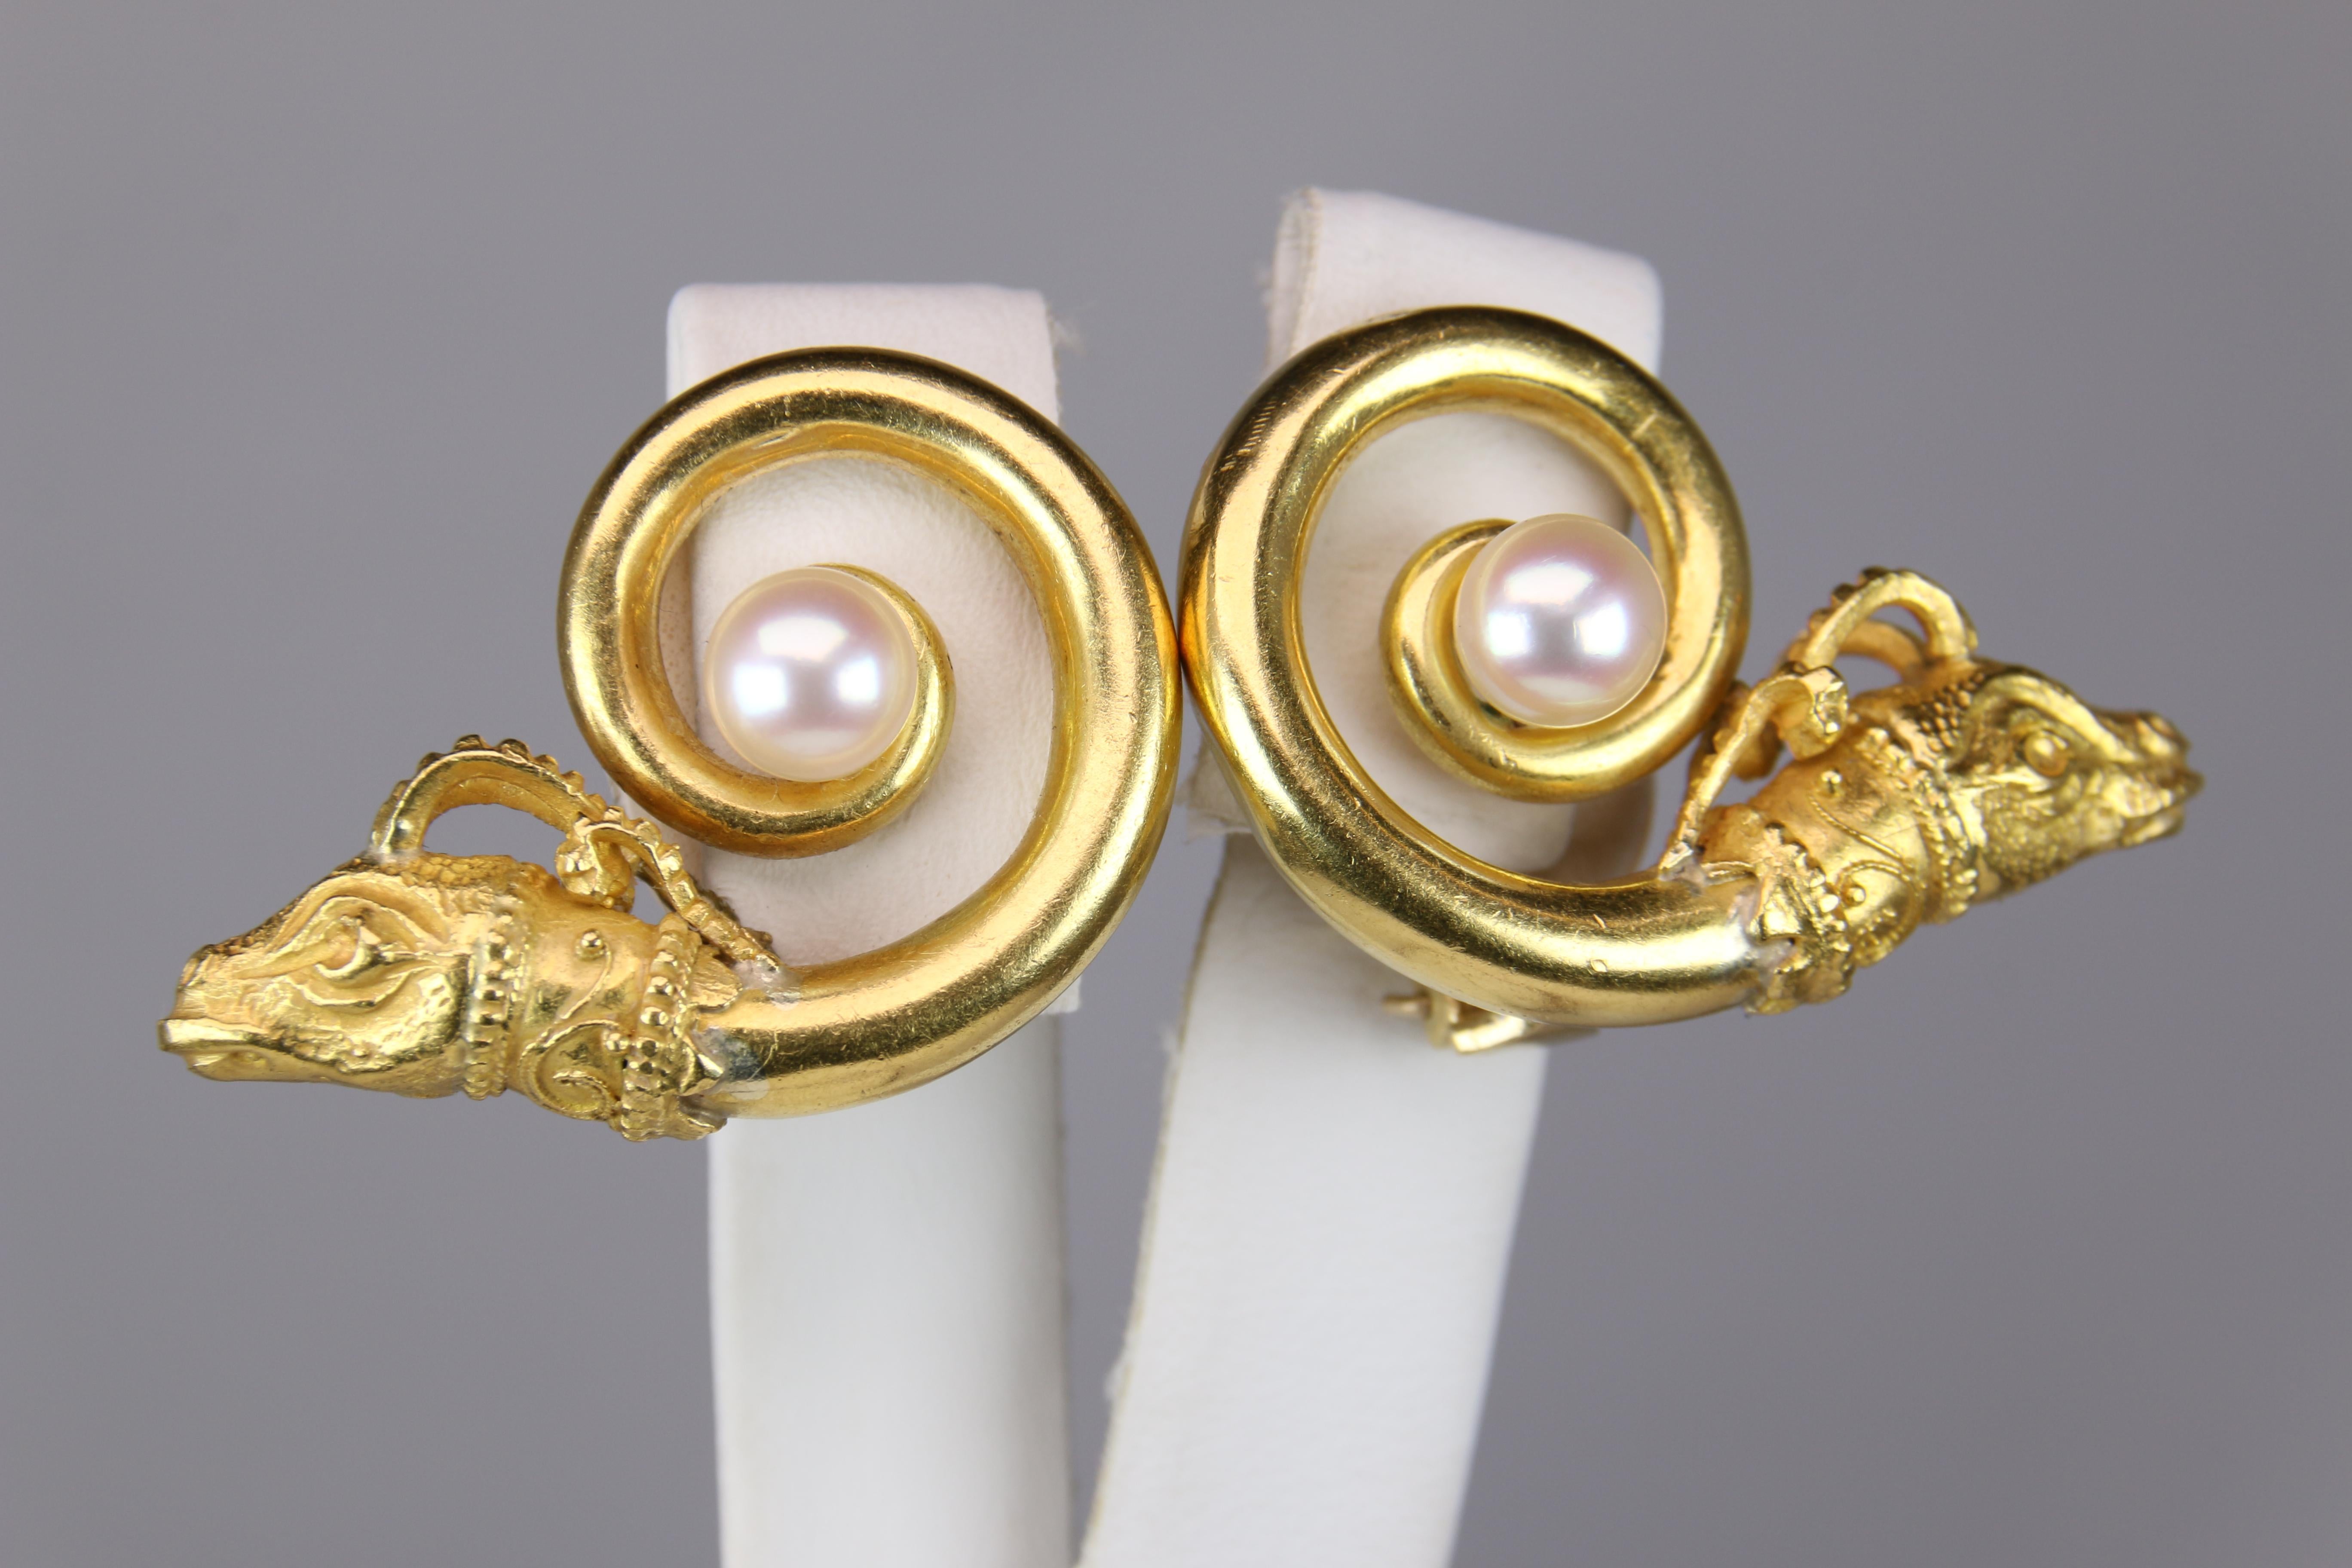 Zolotas Lion and Pearl Clip-On Earrings In Good Condition For Sale In Dallas, TX